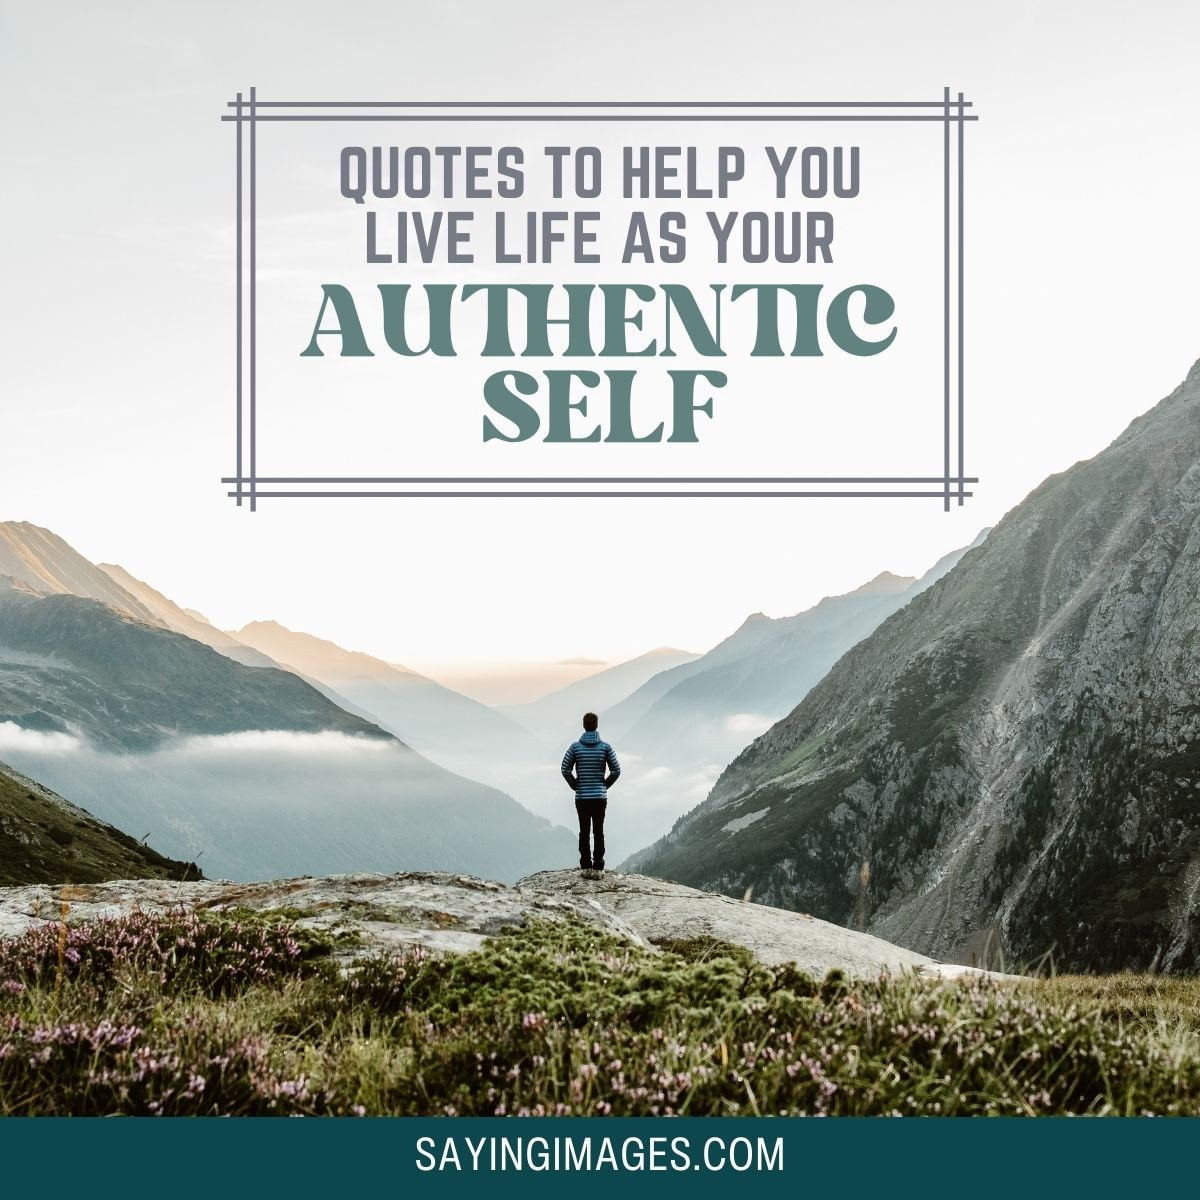 Live Life As Your Authentic Self